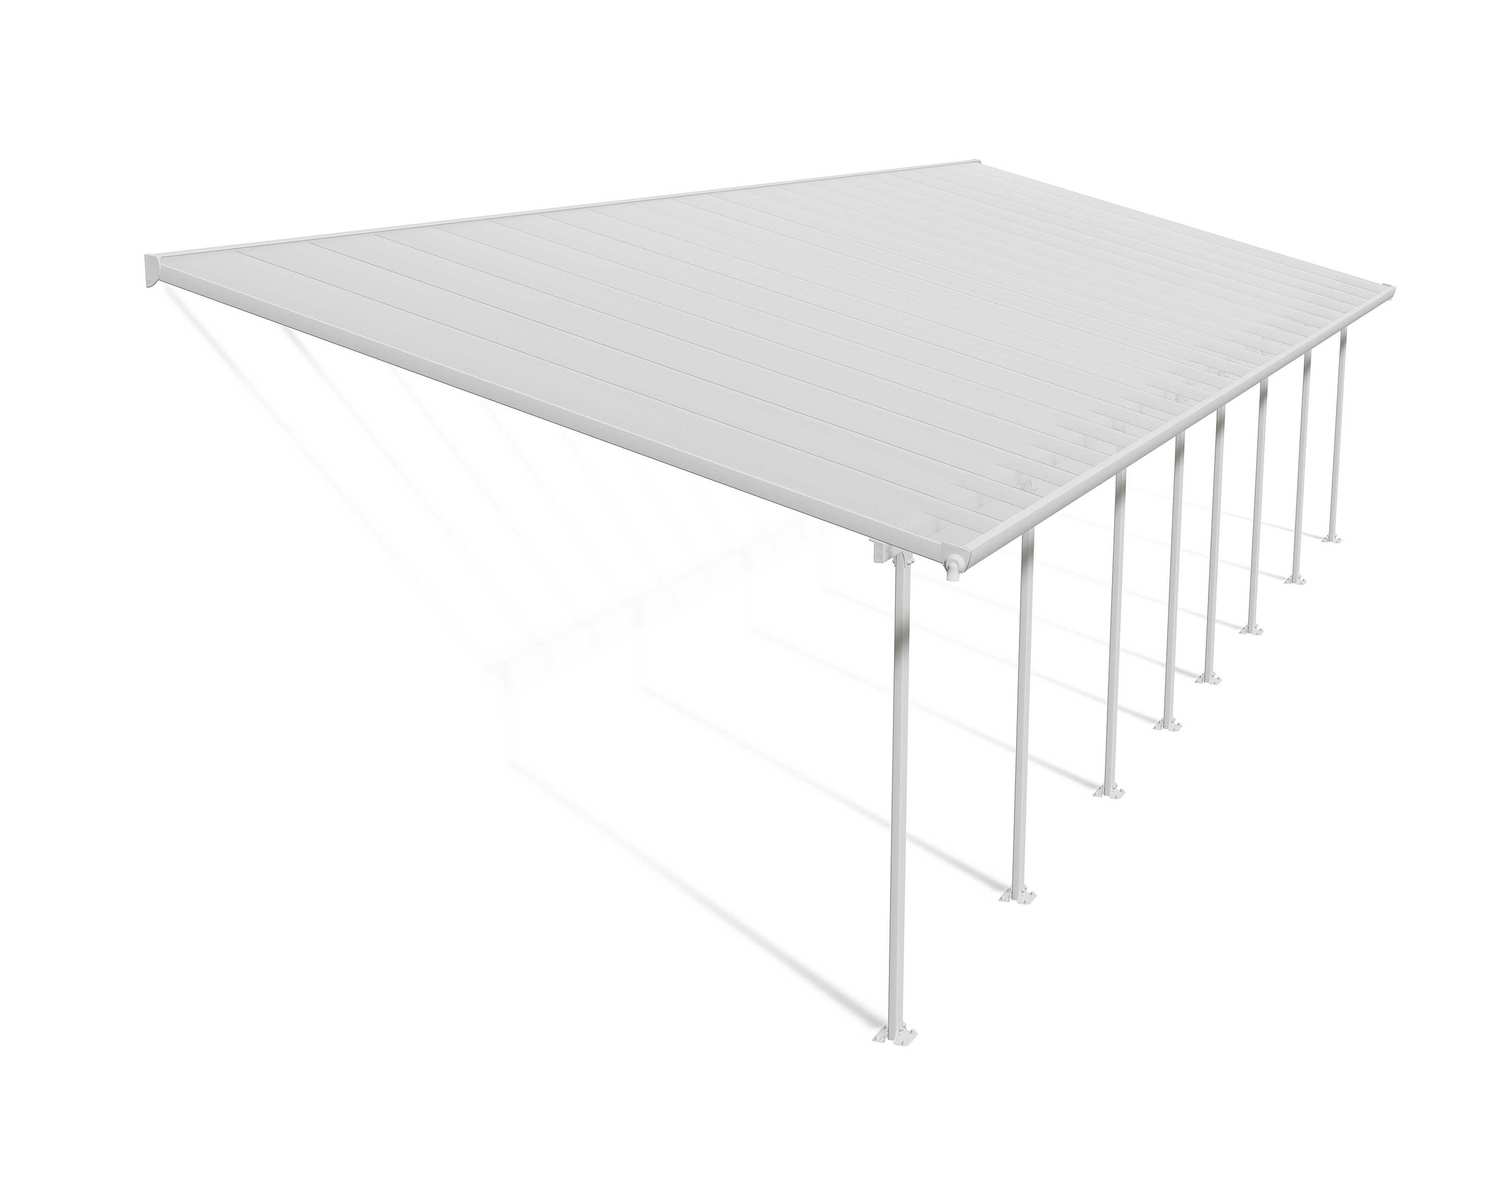 Patio Cover Kit Feria 4 ft. x 12.12 ft. White Structure & Clear Multi Wall Glazing